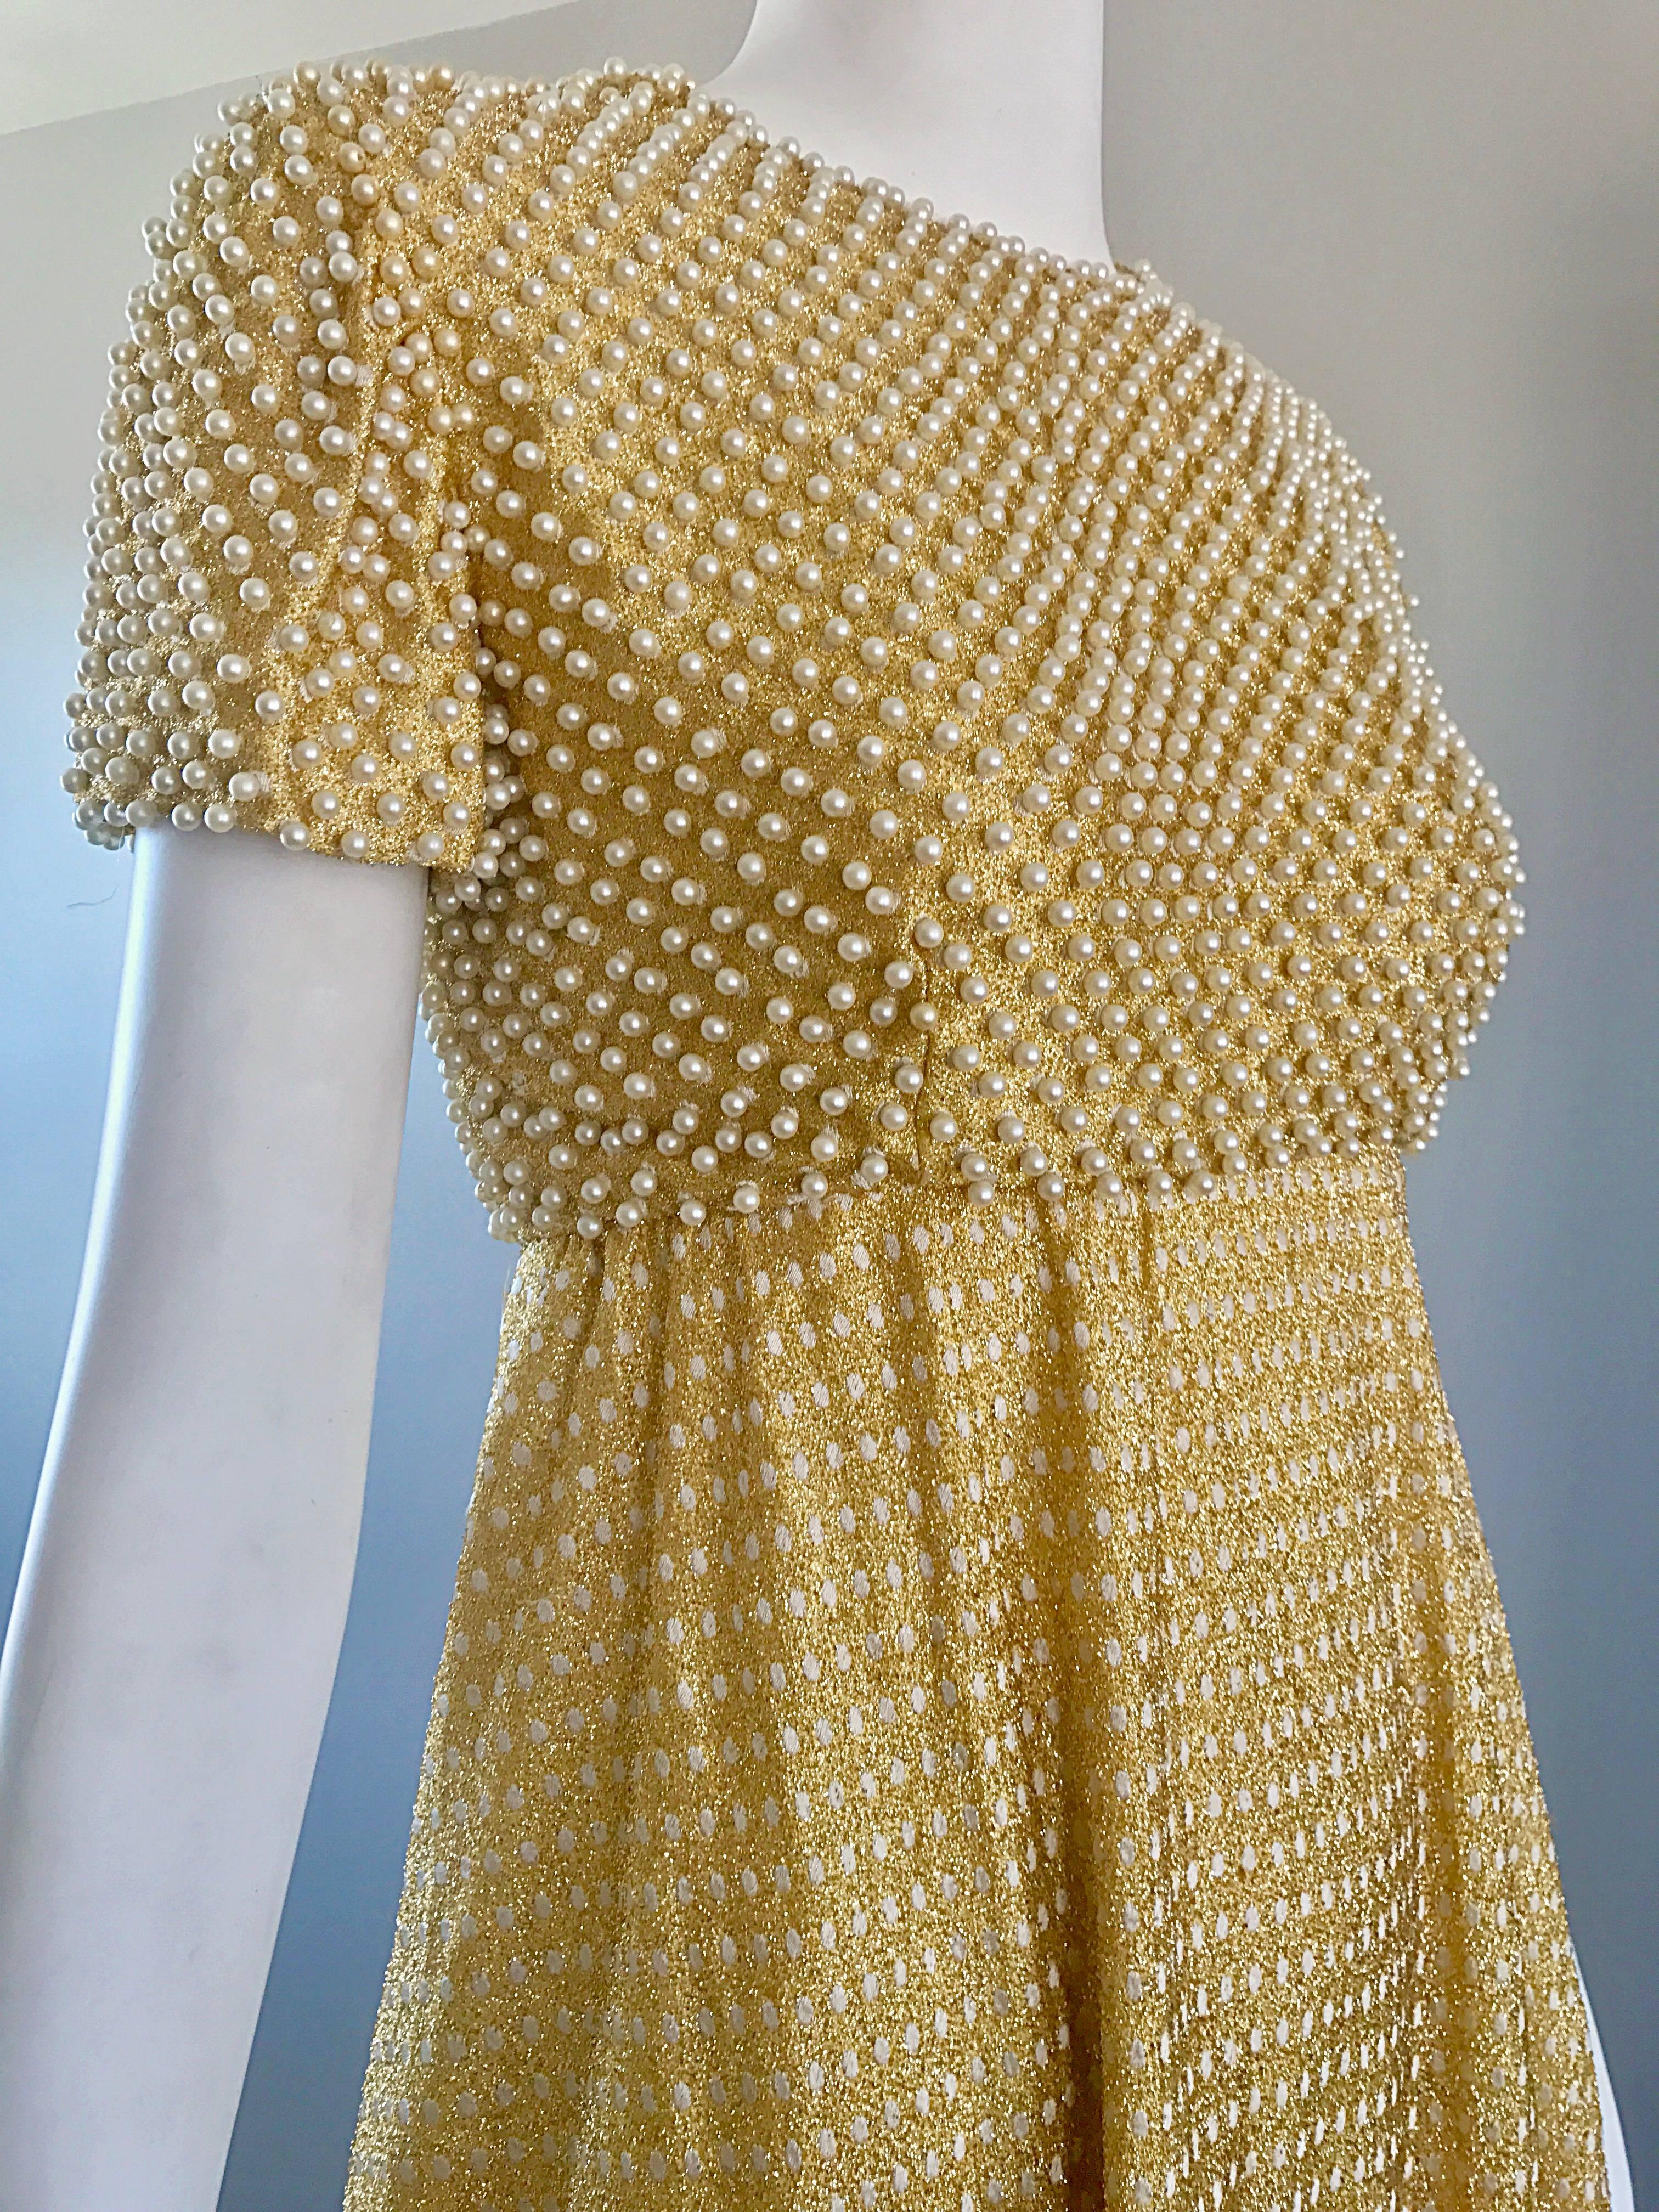 Stunning and rare 1960s GEOFFREY BEENE Couture Gold metallic pearl encrusted silk lurex gown! Features hundreds of hand-sewn white pearls throughout the front and back of the bodice. Fitted bodice with a full skirt. Skirt features white polka dots